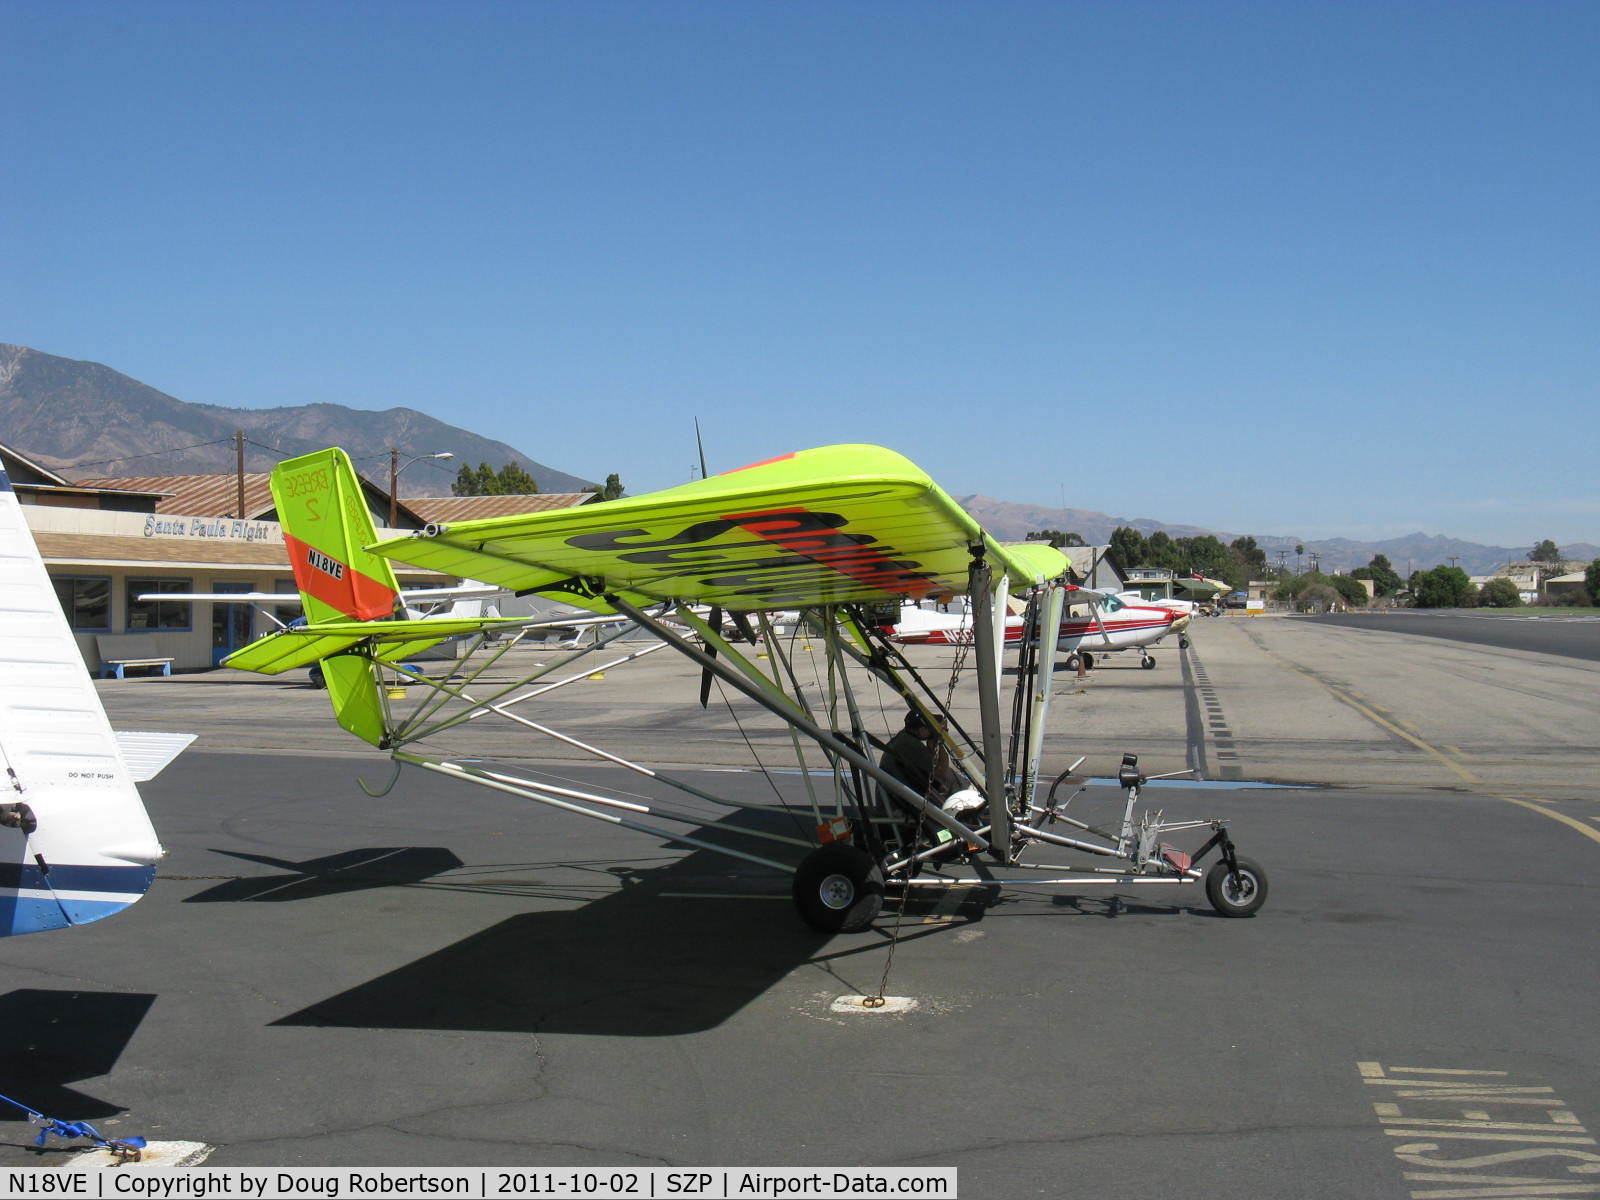 N18VE, 2003 M-Squared Breese 2 C/N 000550, 2003 M-squared BREESE 2 Ultralight Trainer, Rotax 503 DCDI two-stroke two cylinder 52 Hp pusher, two-seat side by side, owner is FAA CFI.